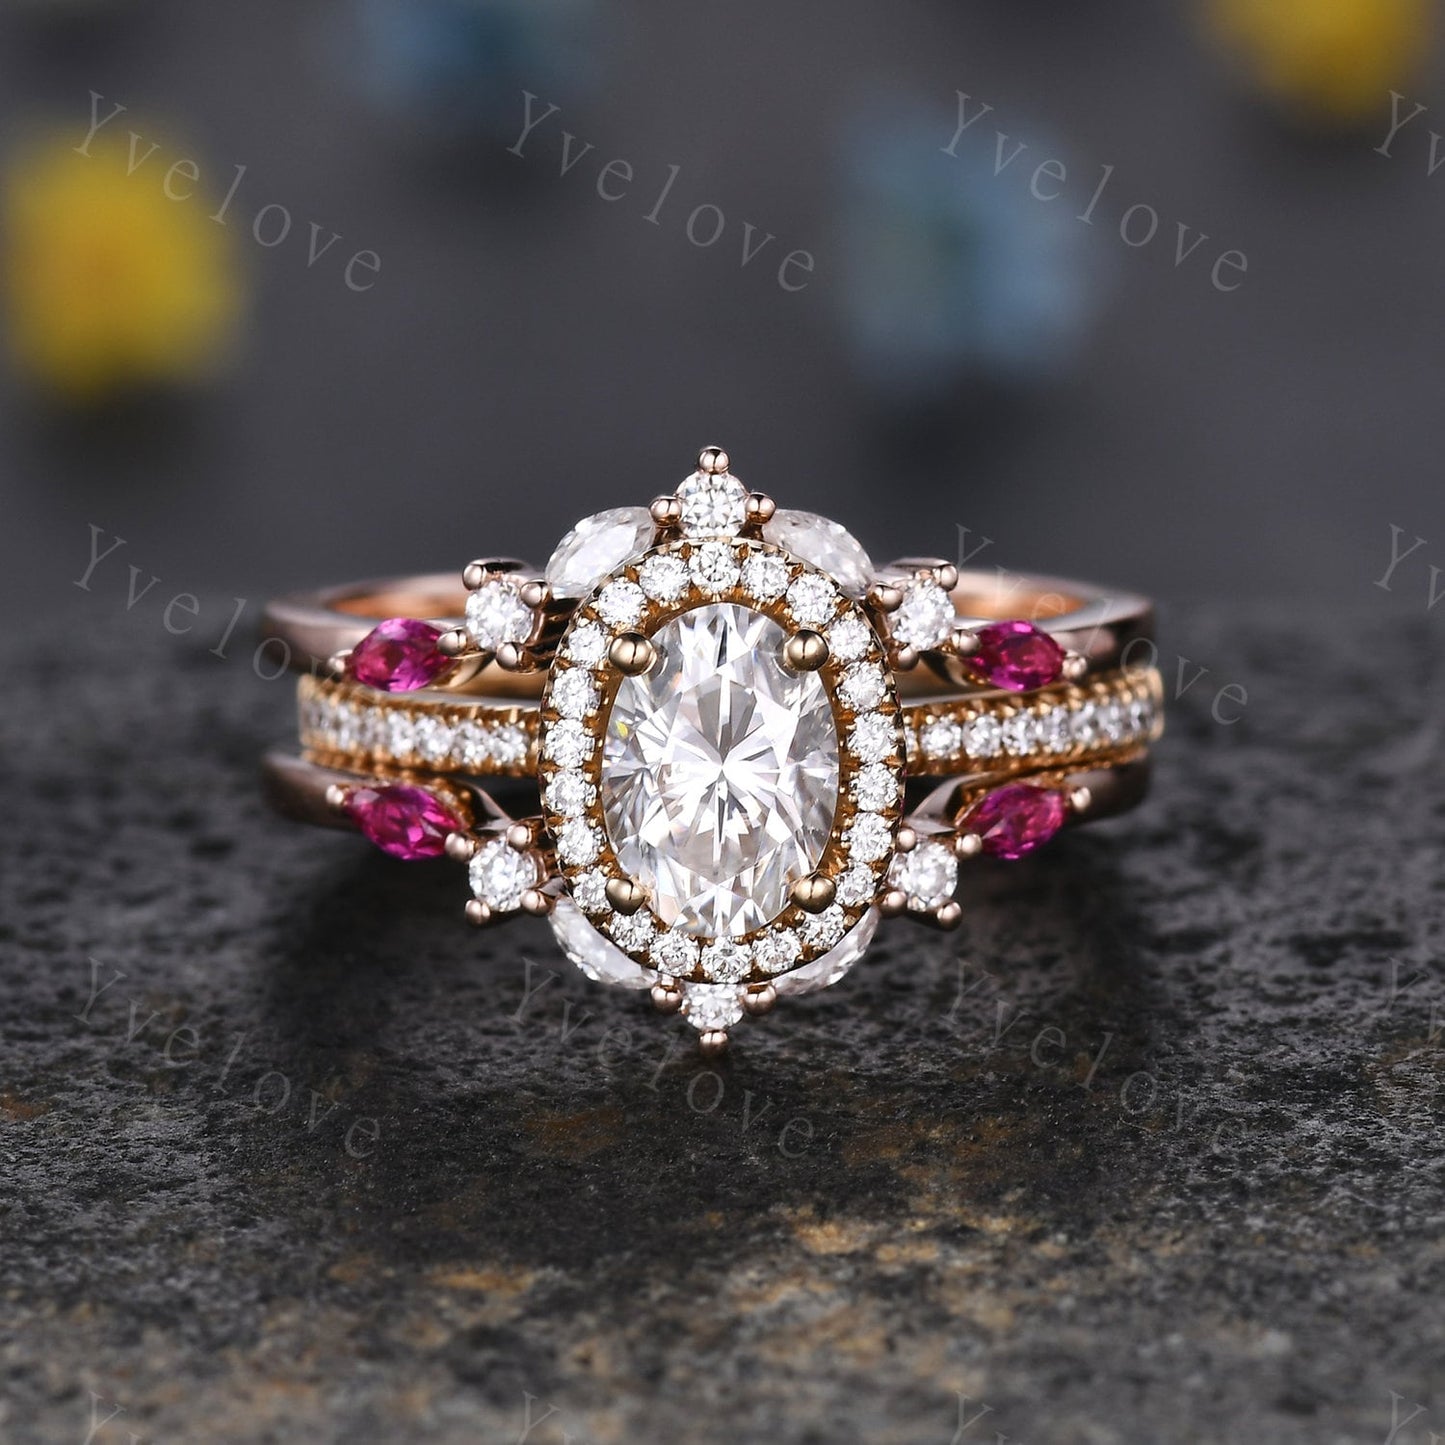 Unique Moissanite Ring,Moissanite Ruby Engagement Ring,Enhancer Wedding Band,Double curved Stacking Matching Band Promise Bridal Ring Gift